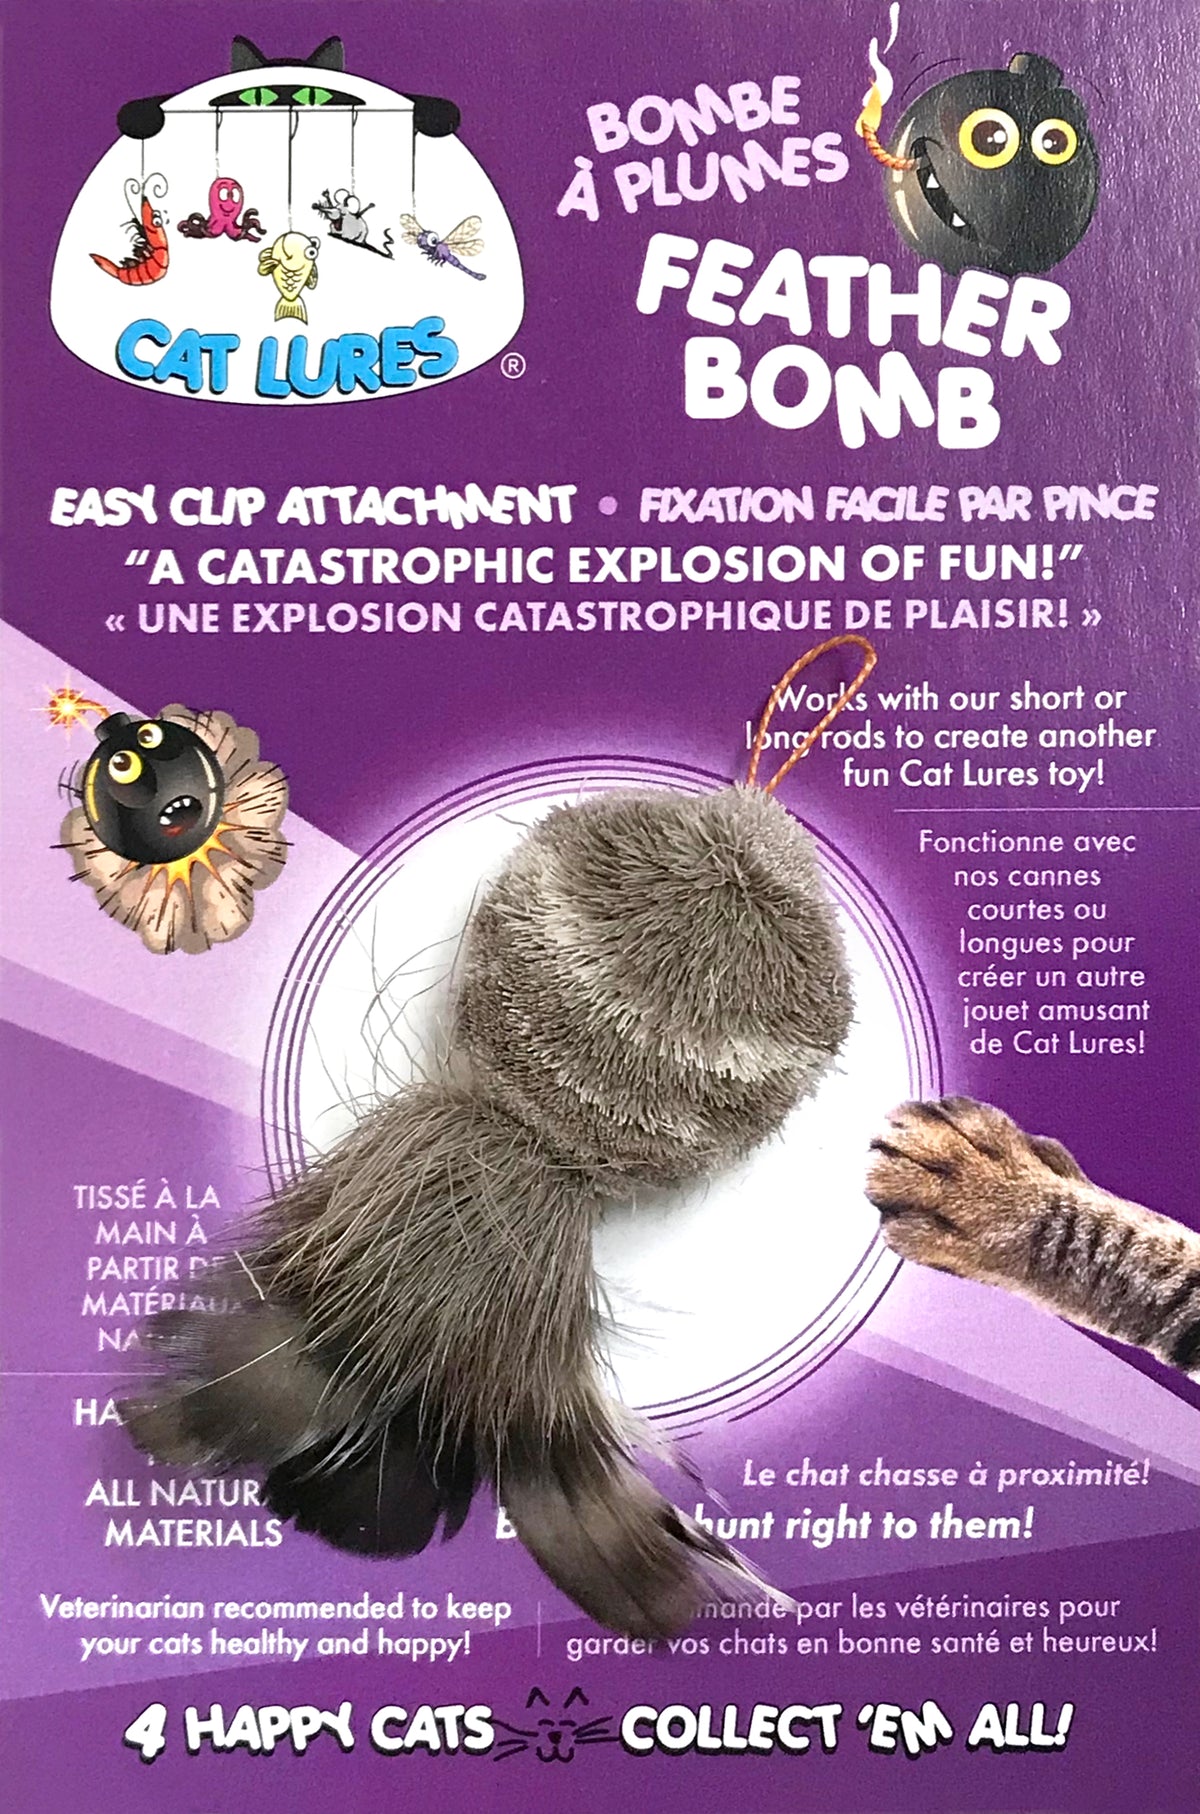 Cat Lures Feather Bomb